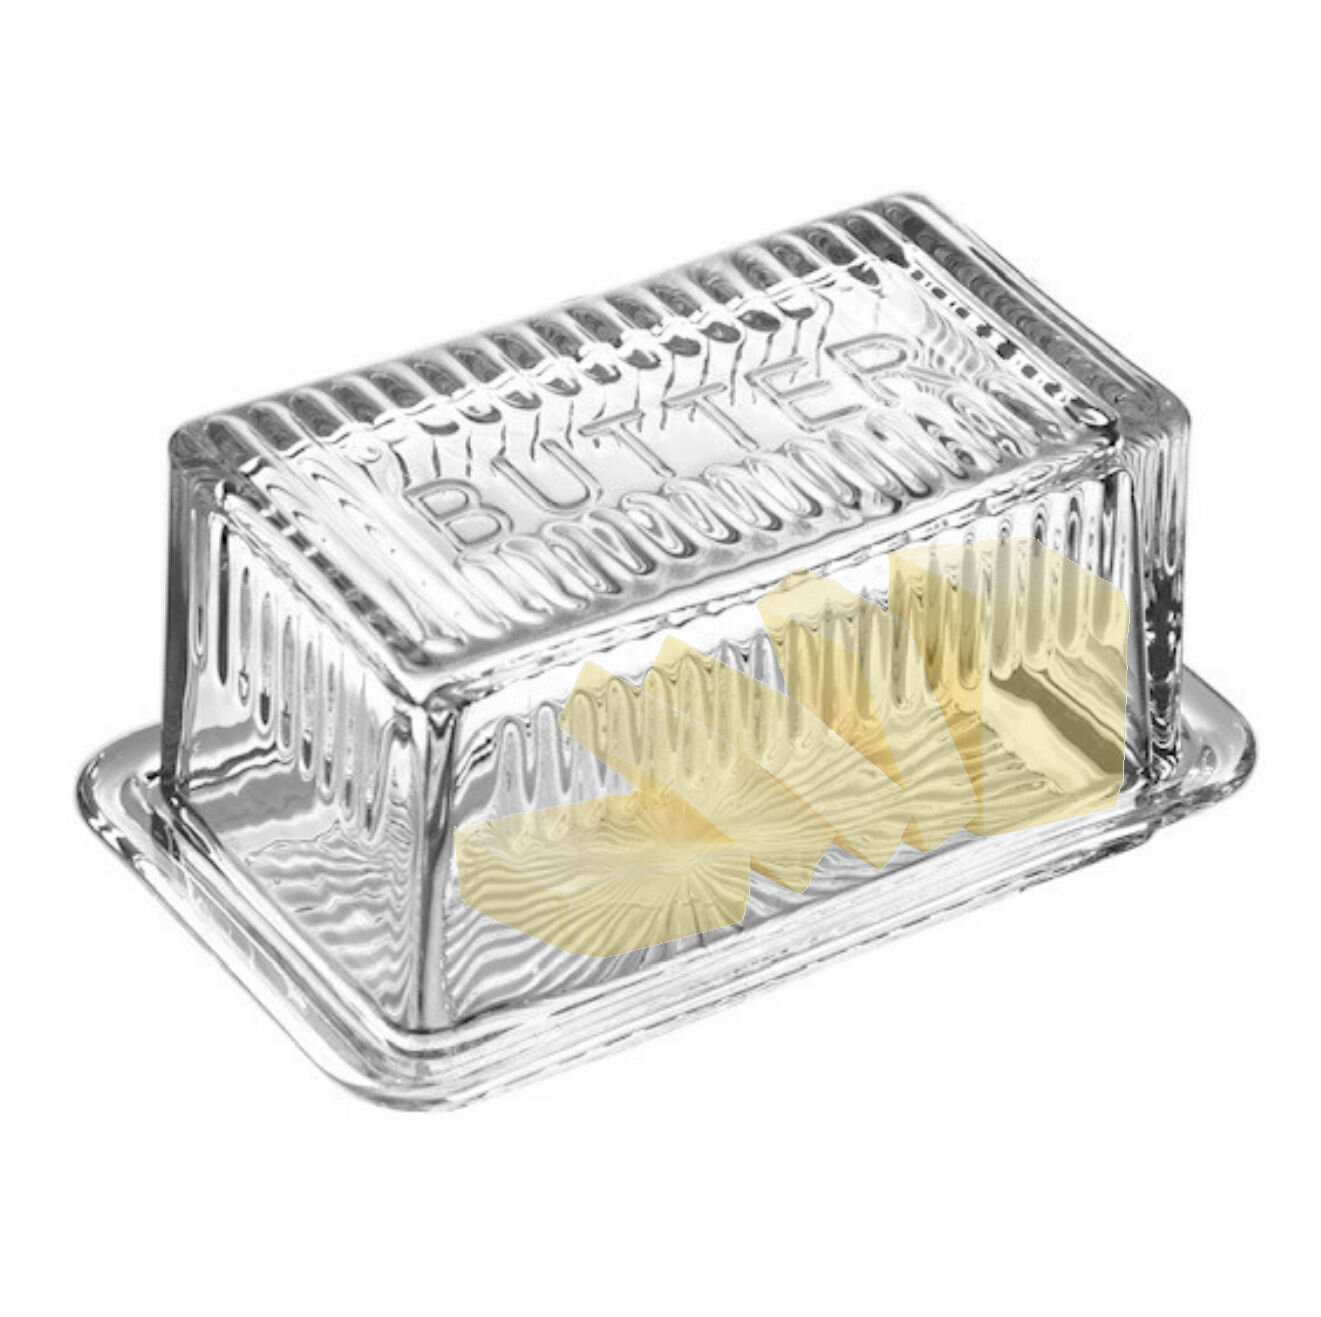 Cuisinox Stainless Steel Butter Dish & Reviews